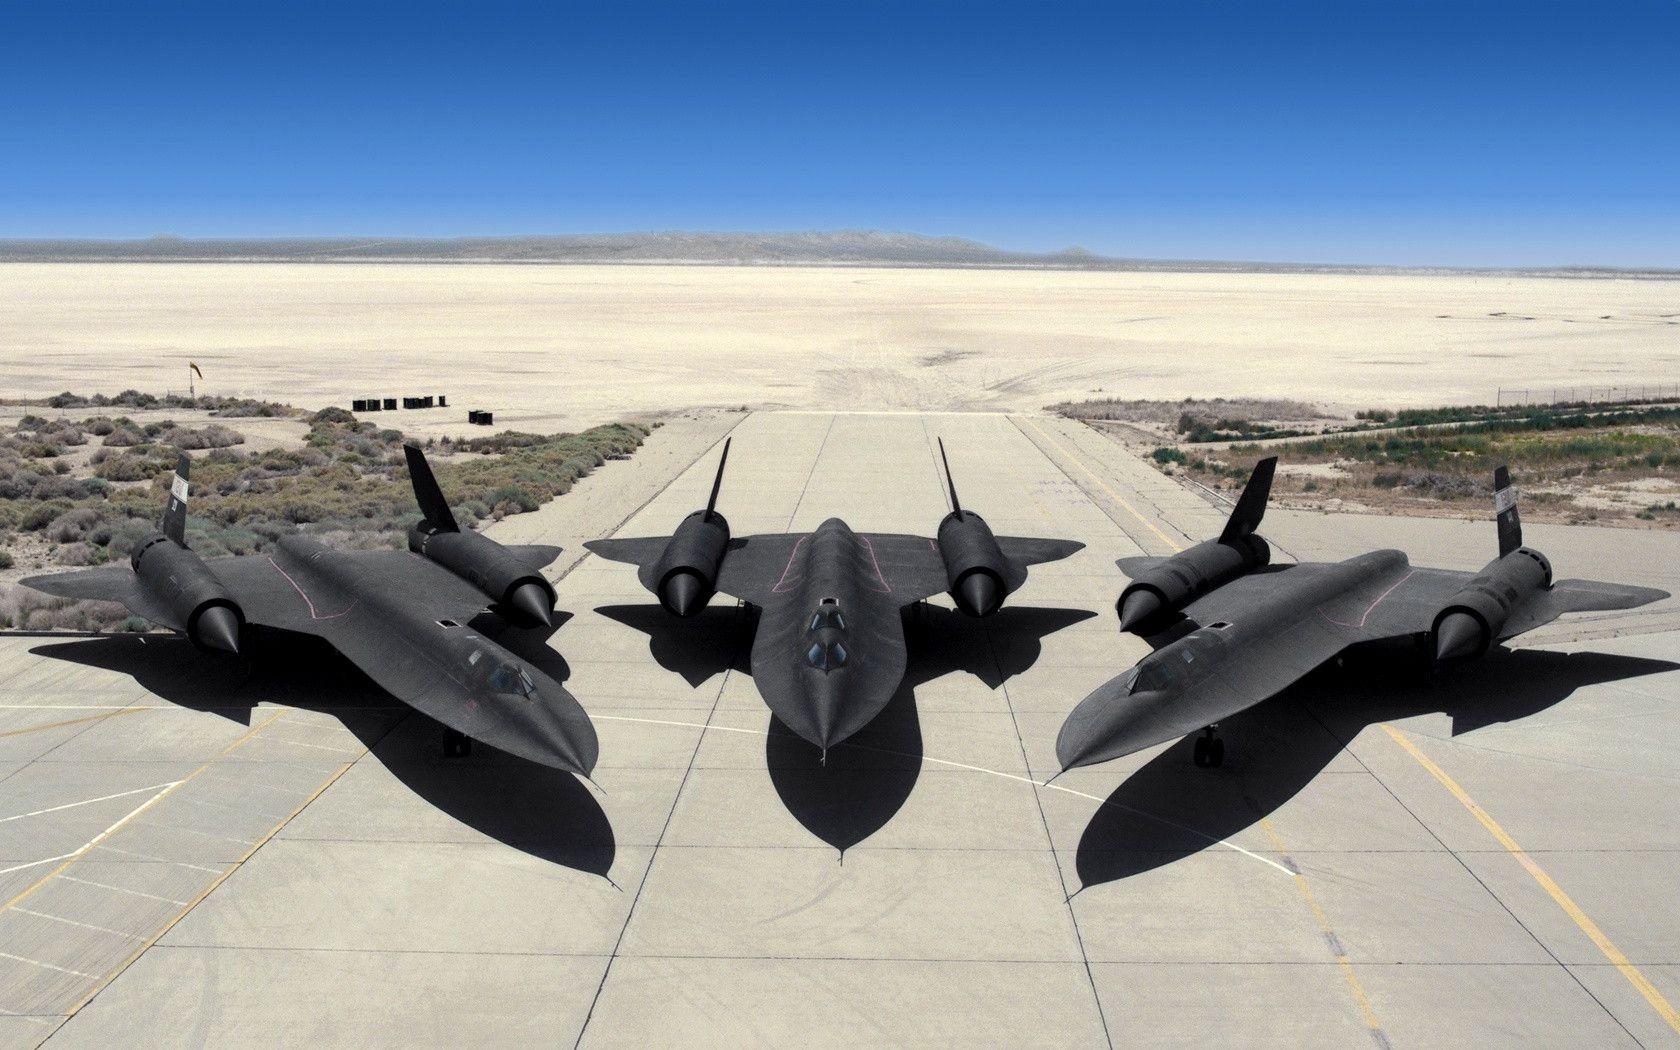 SR 71 Blackbird in the Air Force Base Wallpaper and Photo Download